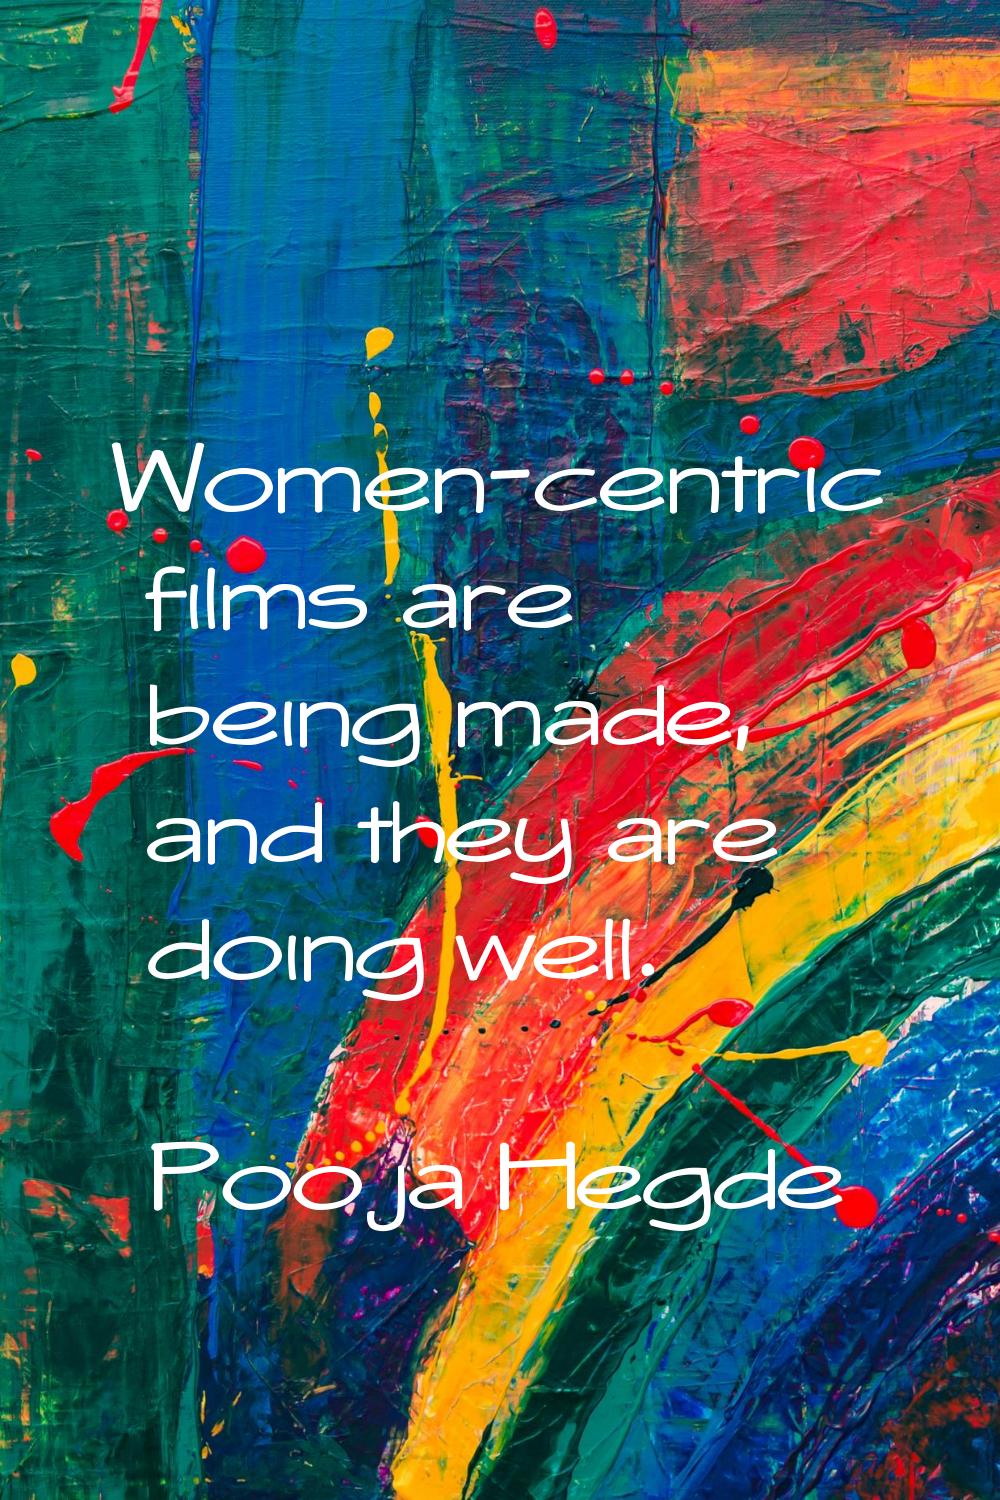 Women-centric films are being made, and they are doing well.